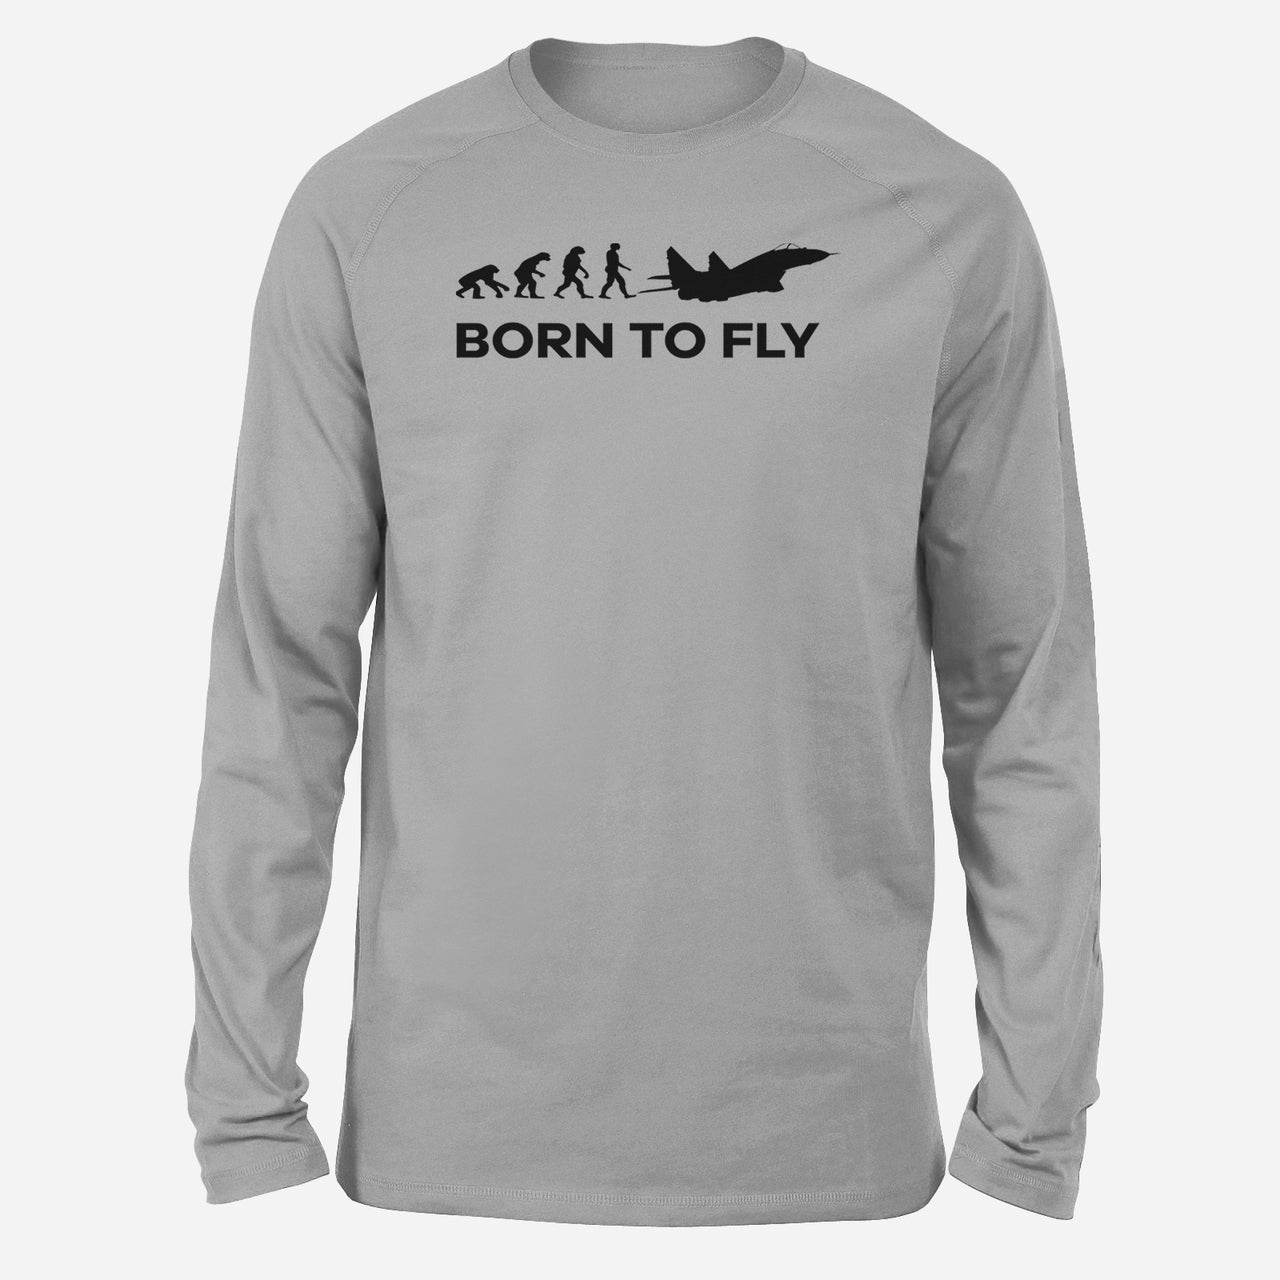 Born To Fly Military Designed Long-Sleeve T-Shirts